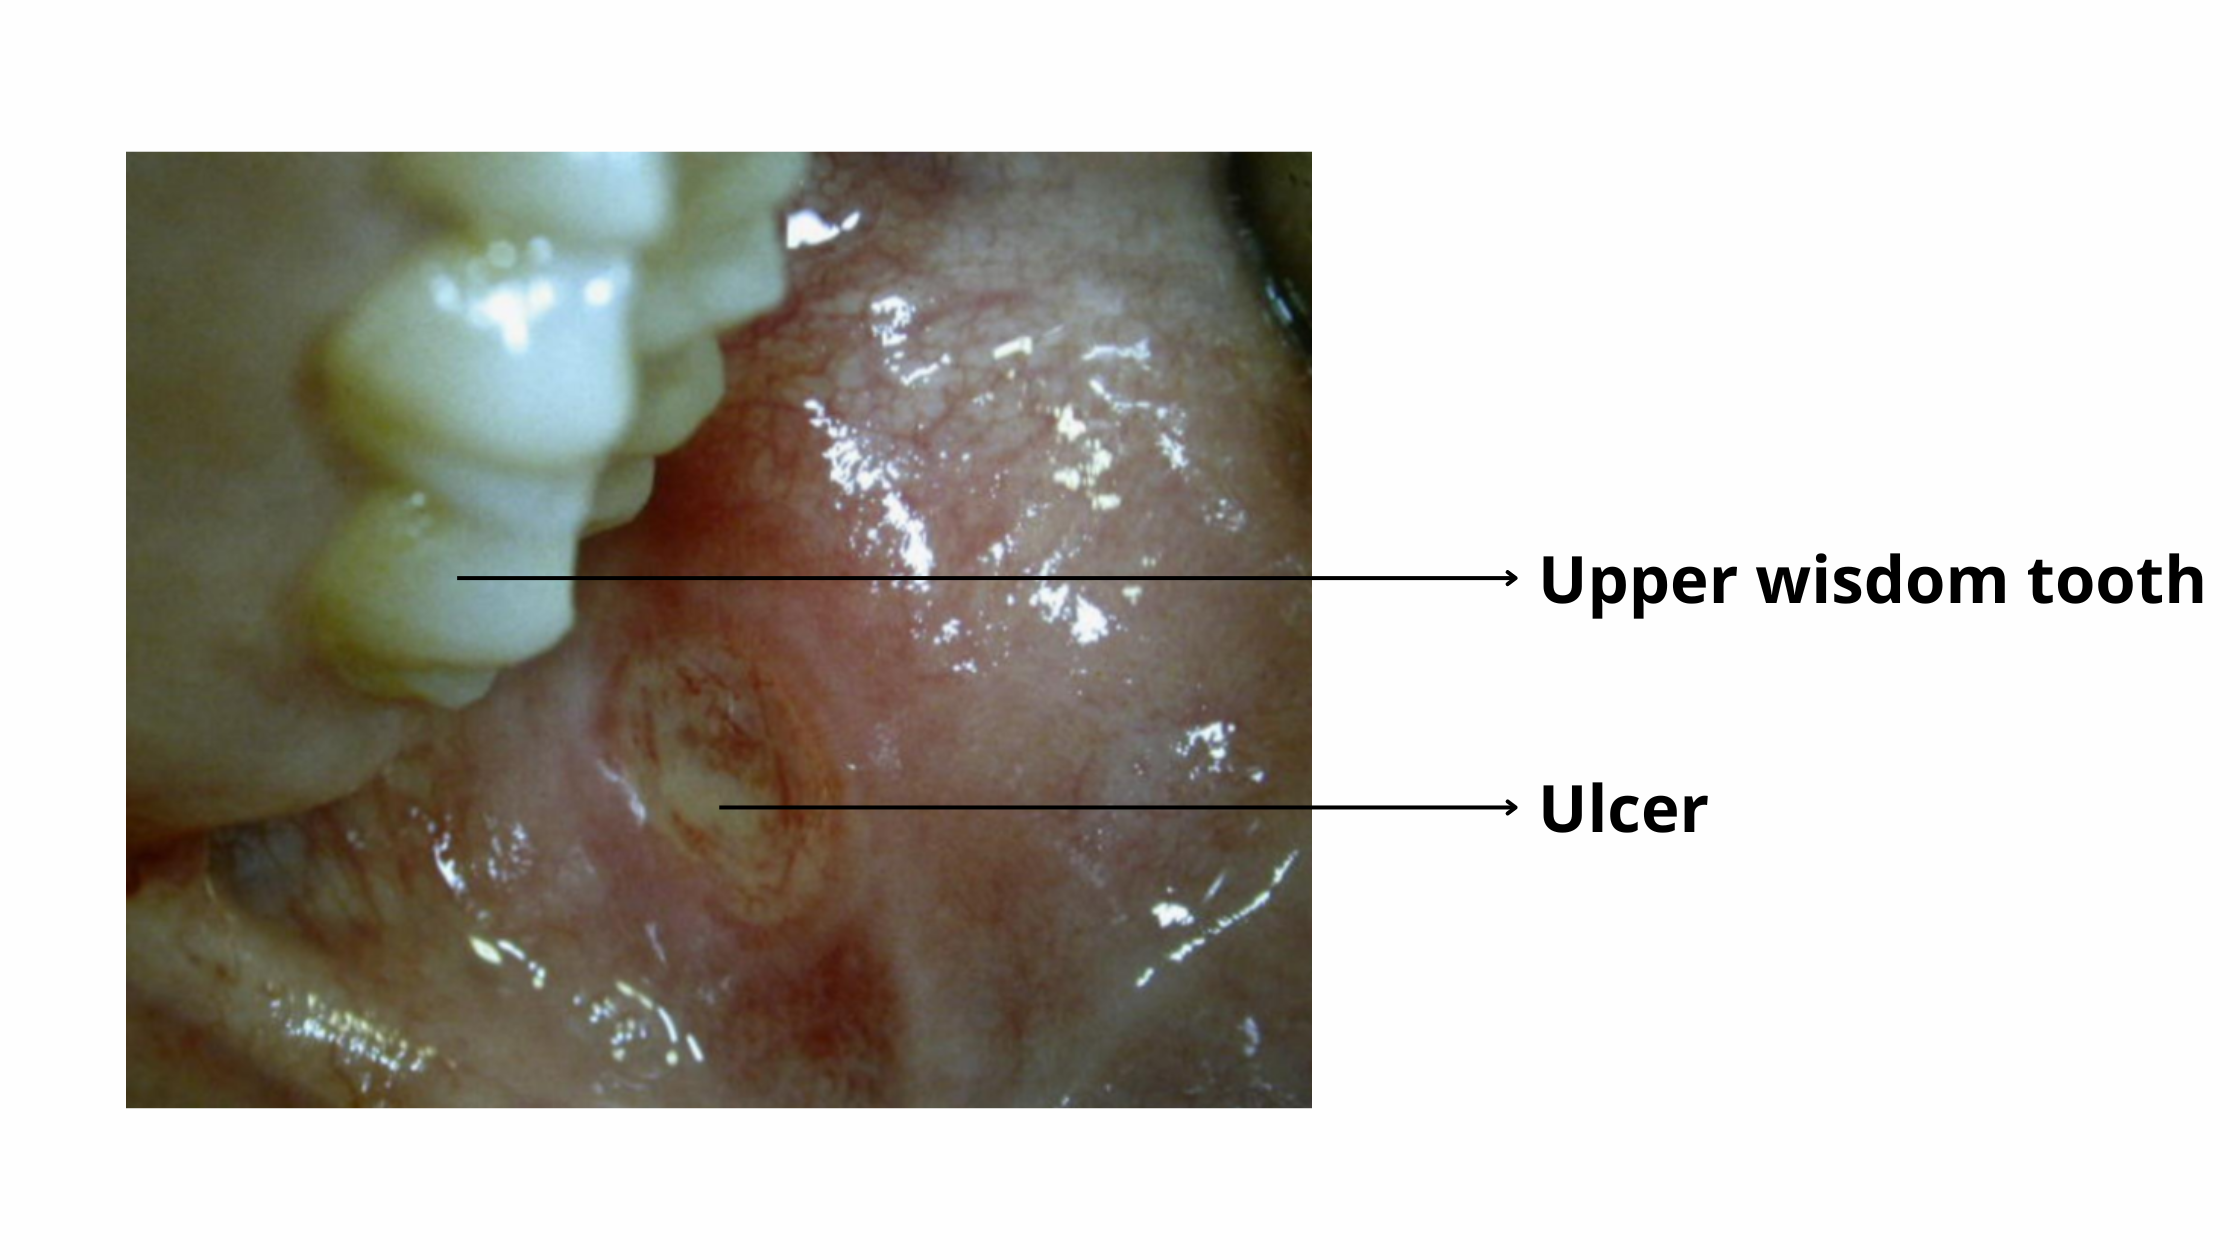 Clinical image of an upper wisdom tooth growing sideways towards cheek and causing an ulcer.